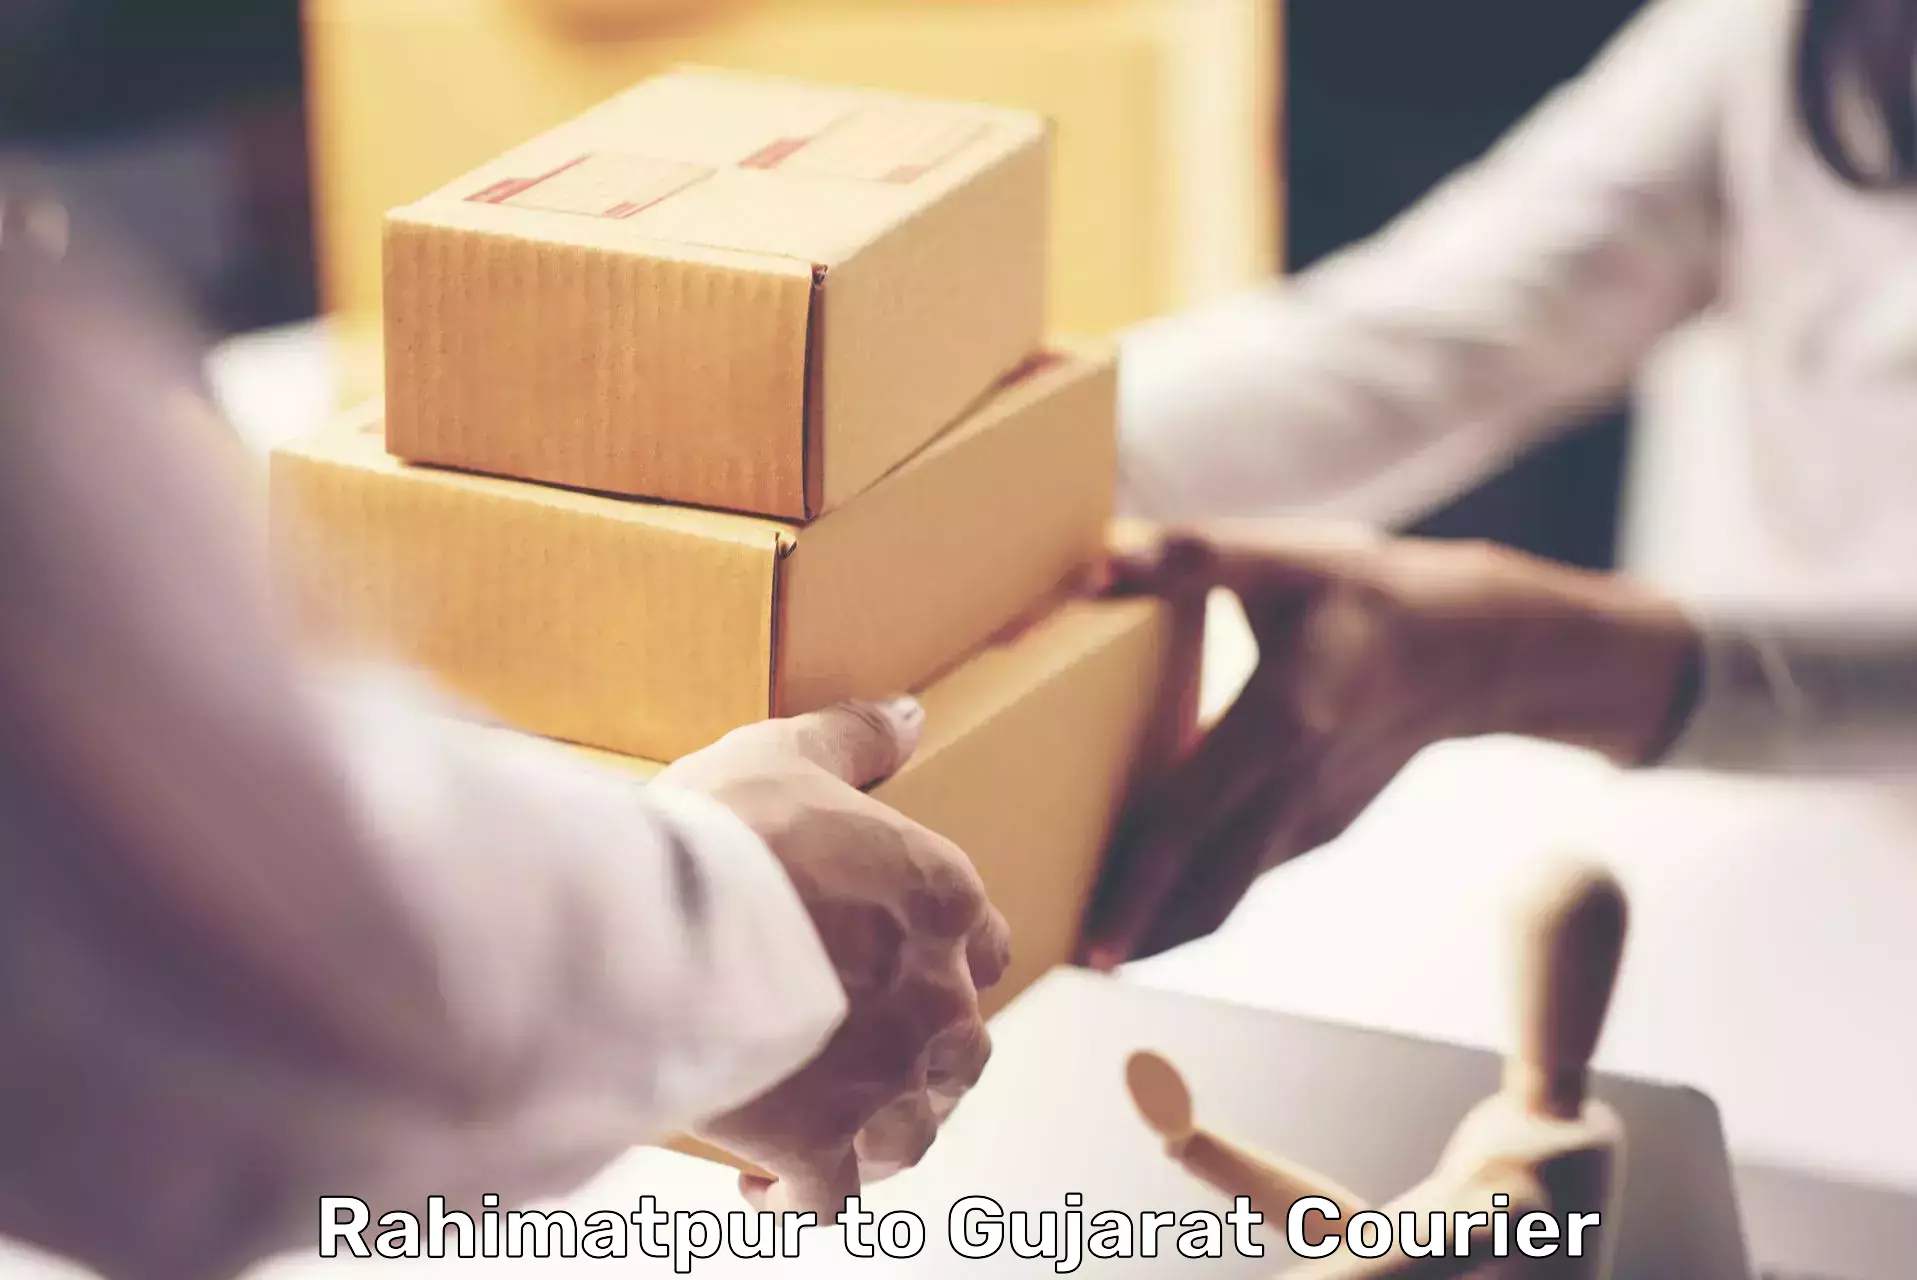 On-call courier service Rahimatpur to Gujarat